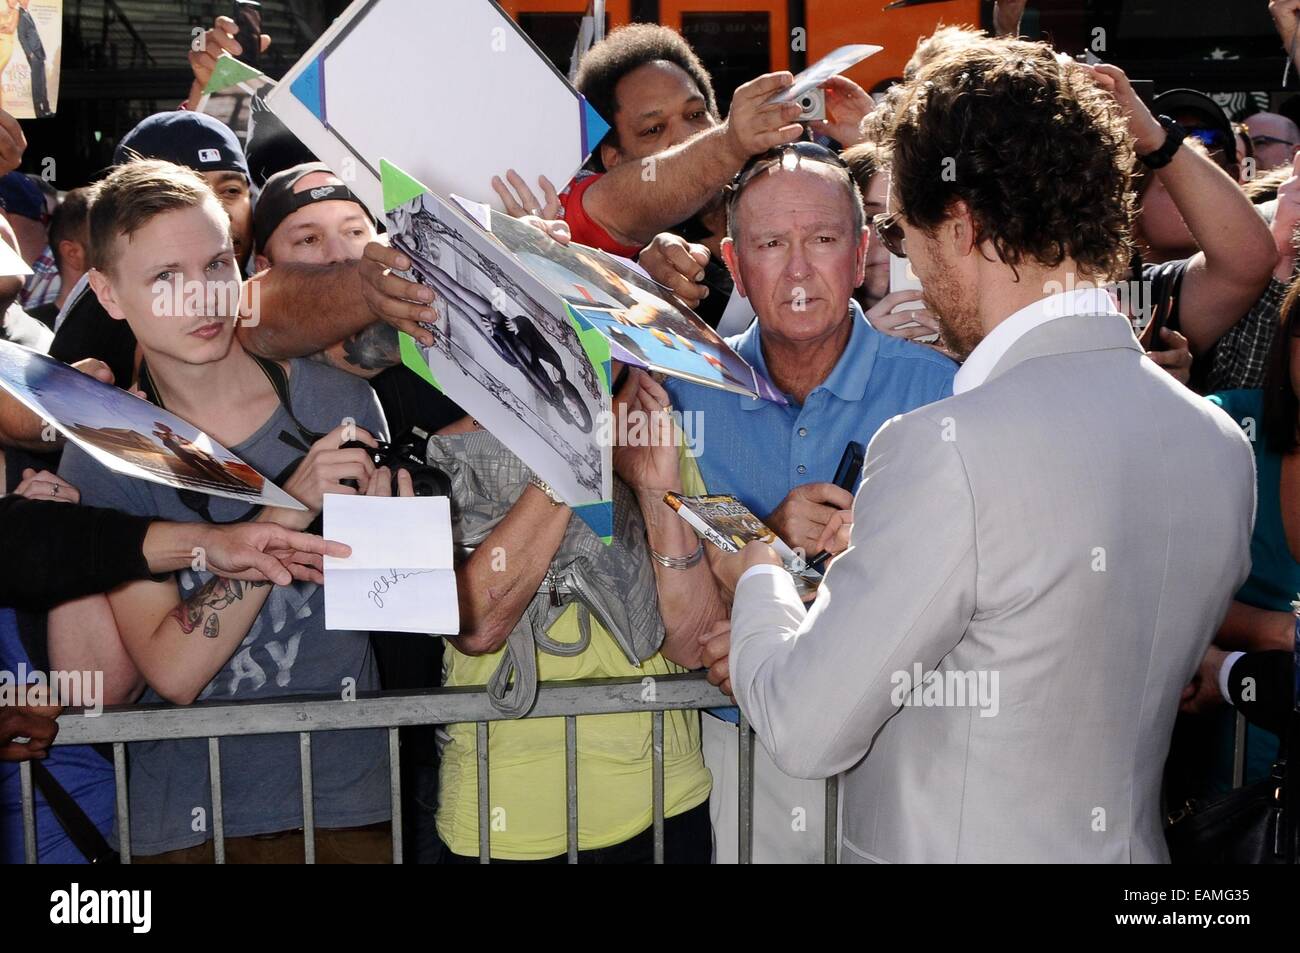 Los Angeles, CA, USA. 17th Nov, 2014. Matthew McConaughey at the induction ceremony for Star on the Hollywood Walk of Fame for Matthew McConaughey, Hollywood Boulevard, Los Angeles, CA November 17, 2014. Credit:  Michael Germana/Everett Collection/Alamy Live News Stock Photo